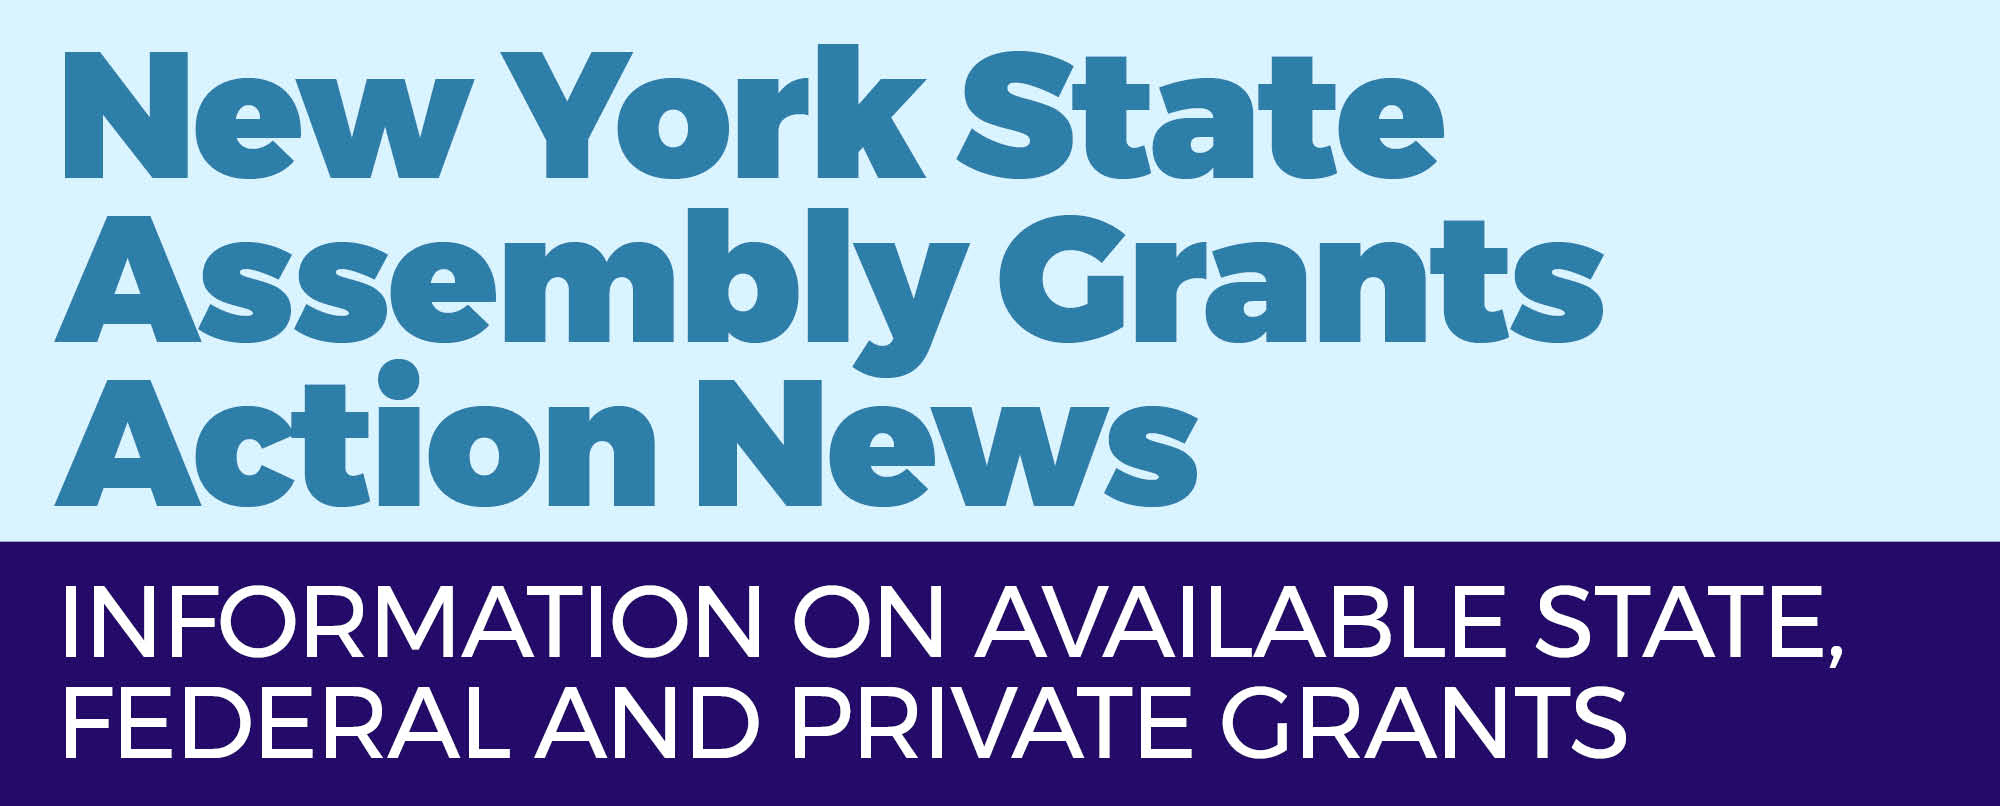 Grants Action News - Special to Member